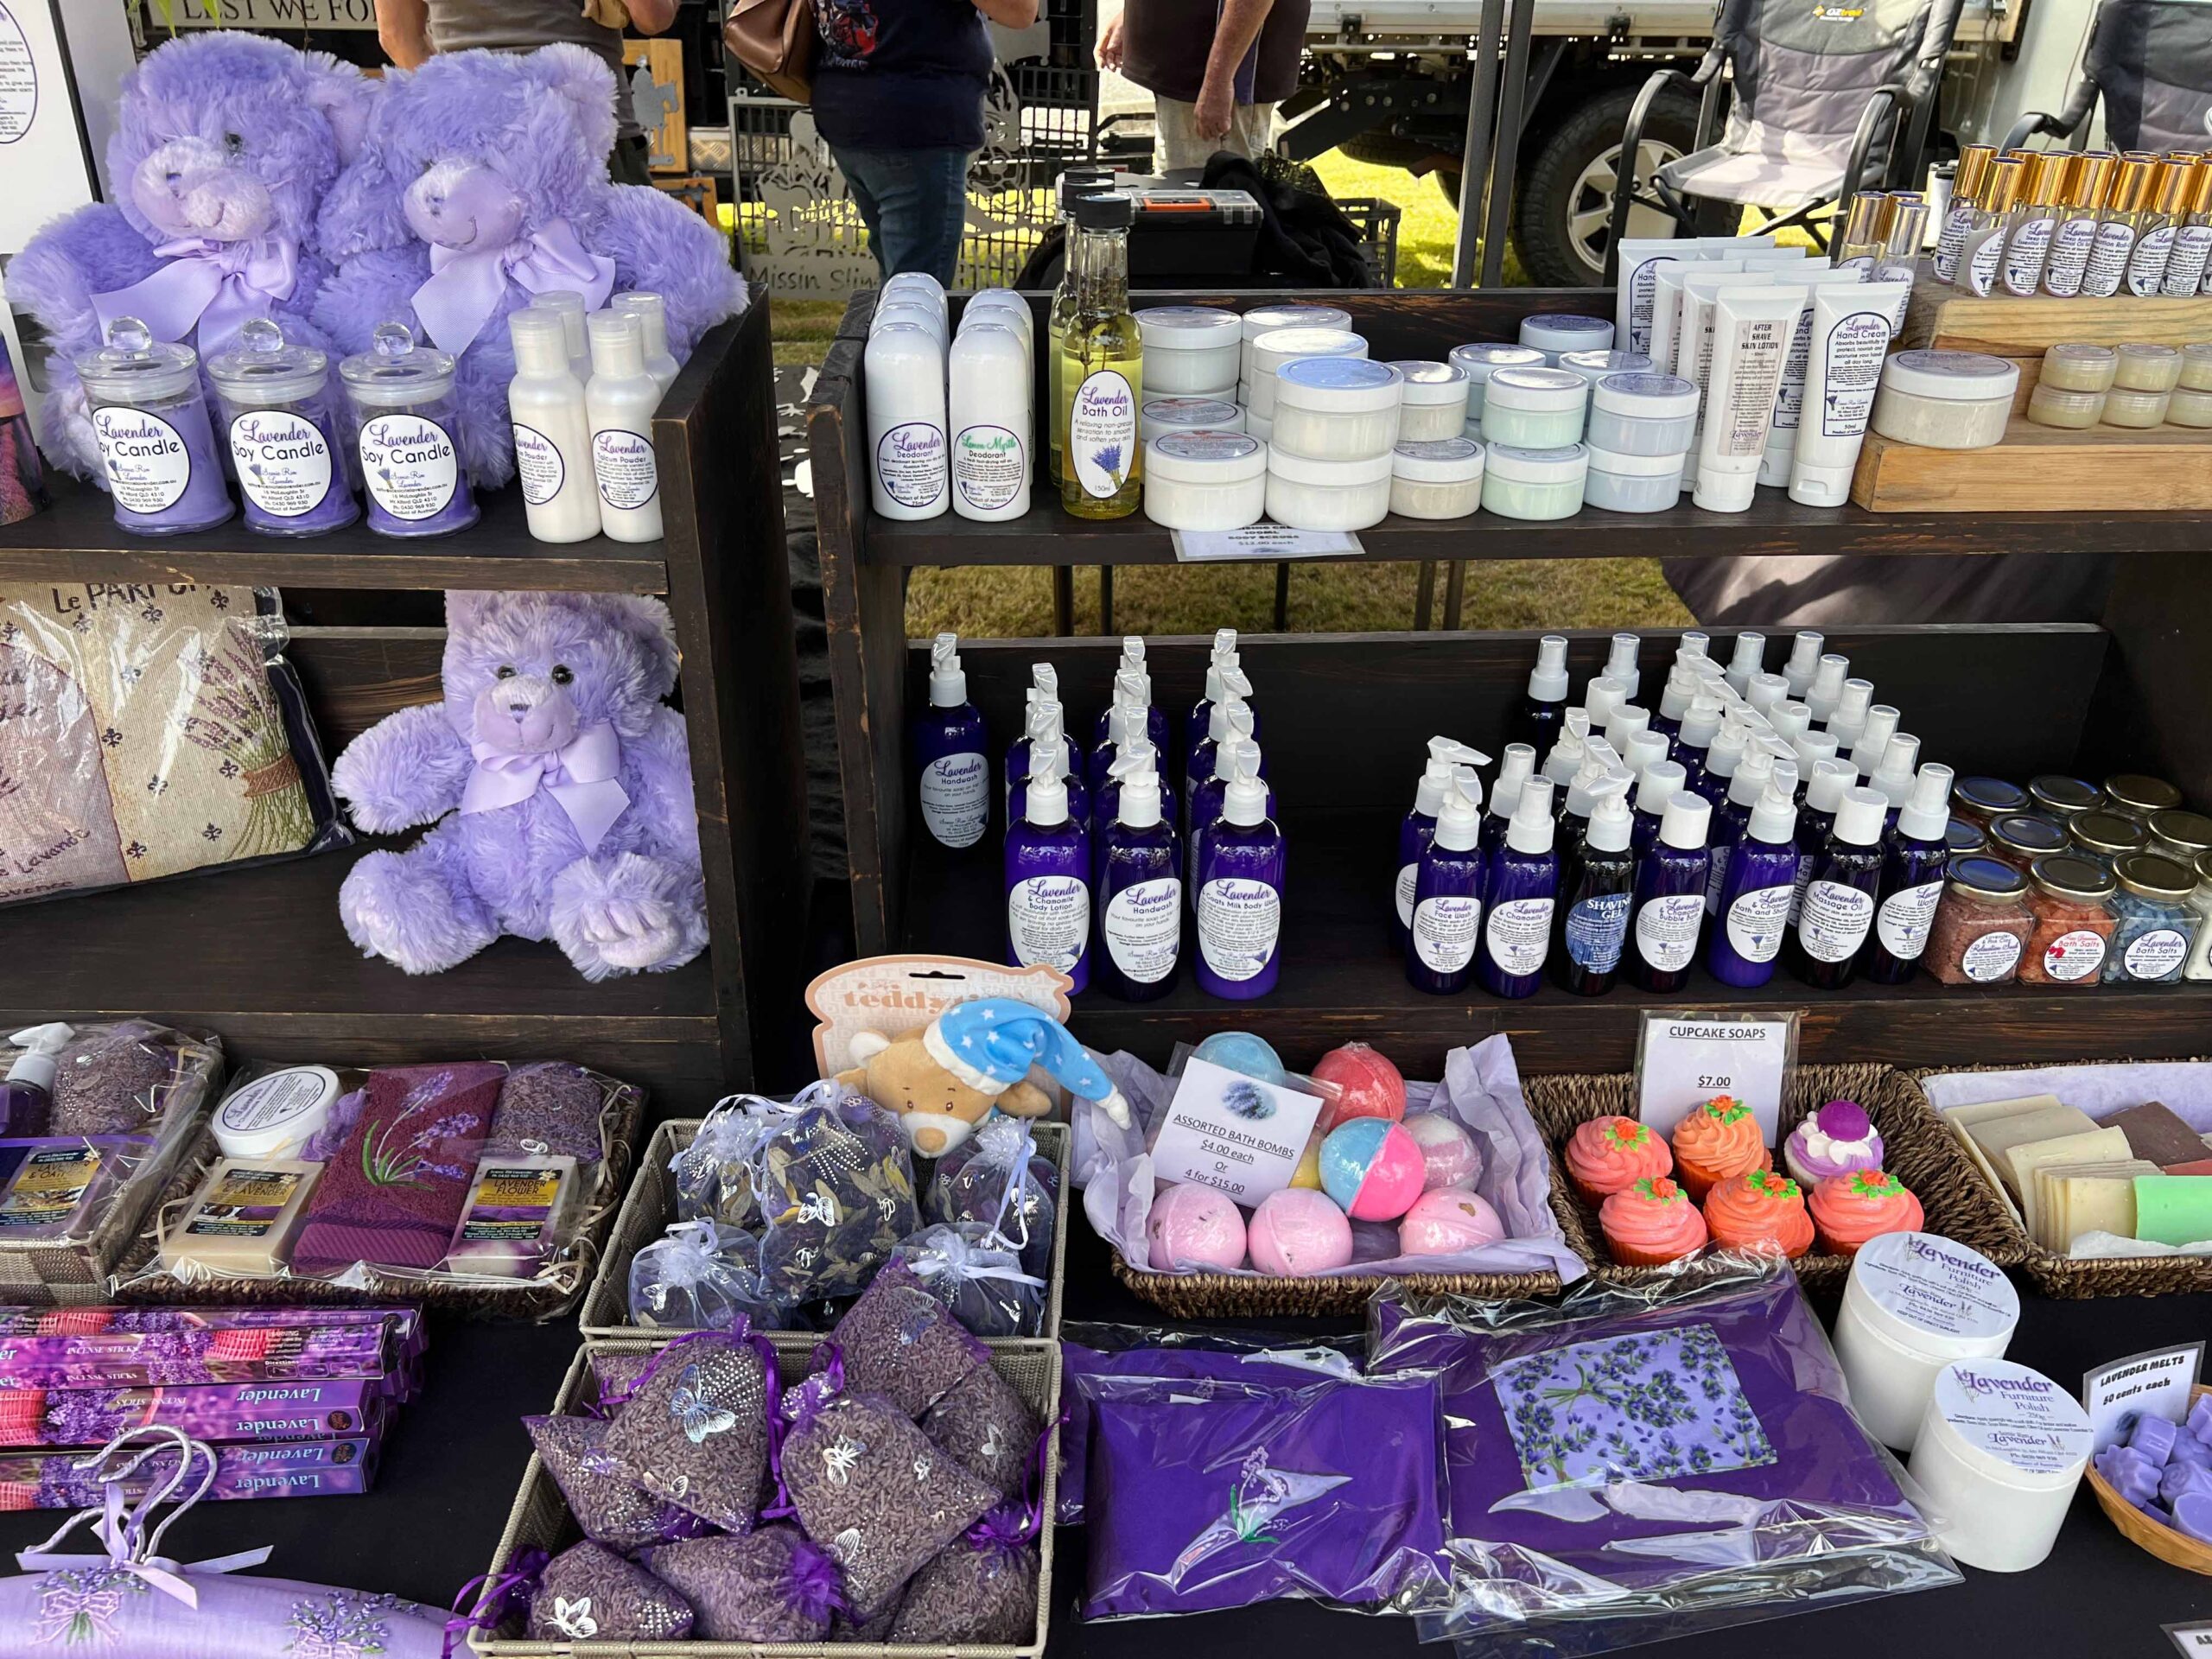 Lavender products at the Springfield Markets